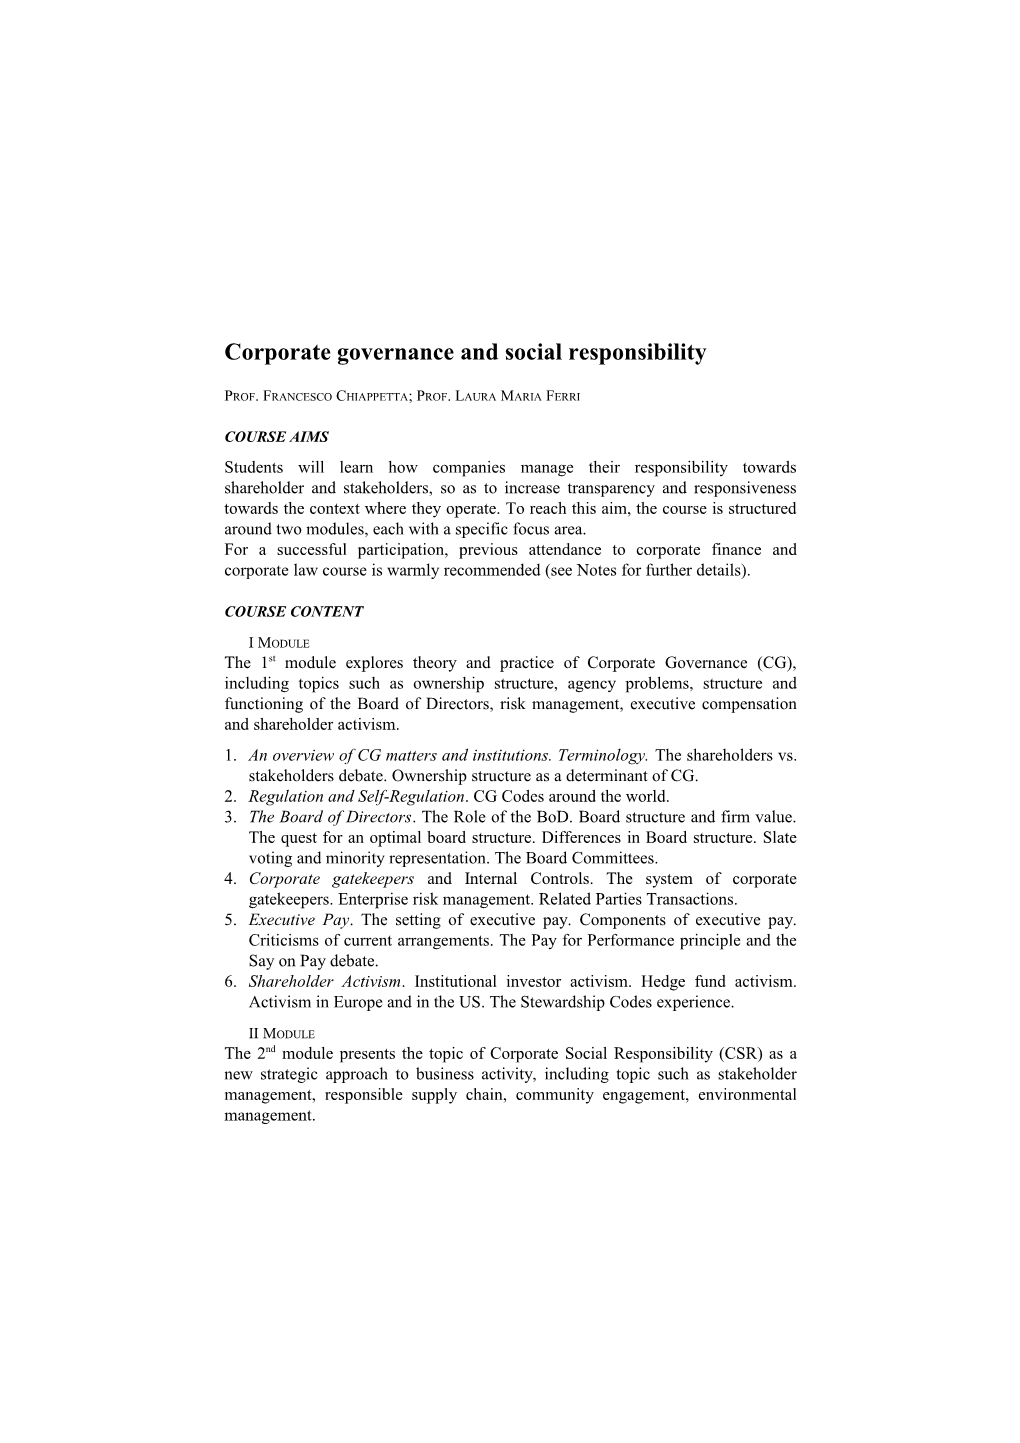 Corporate Governance and Social Responsibility